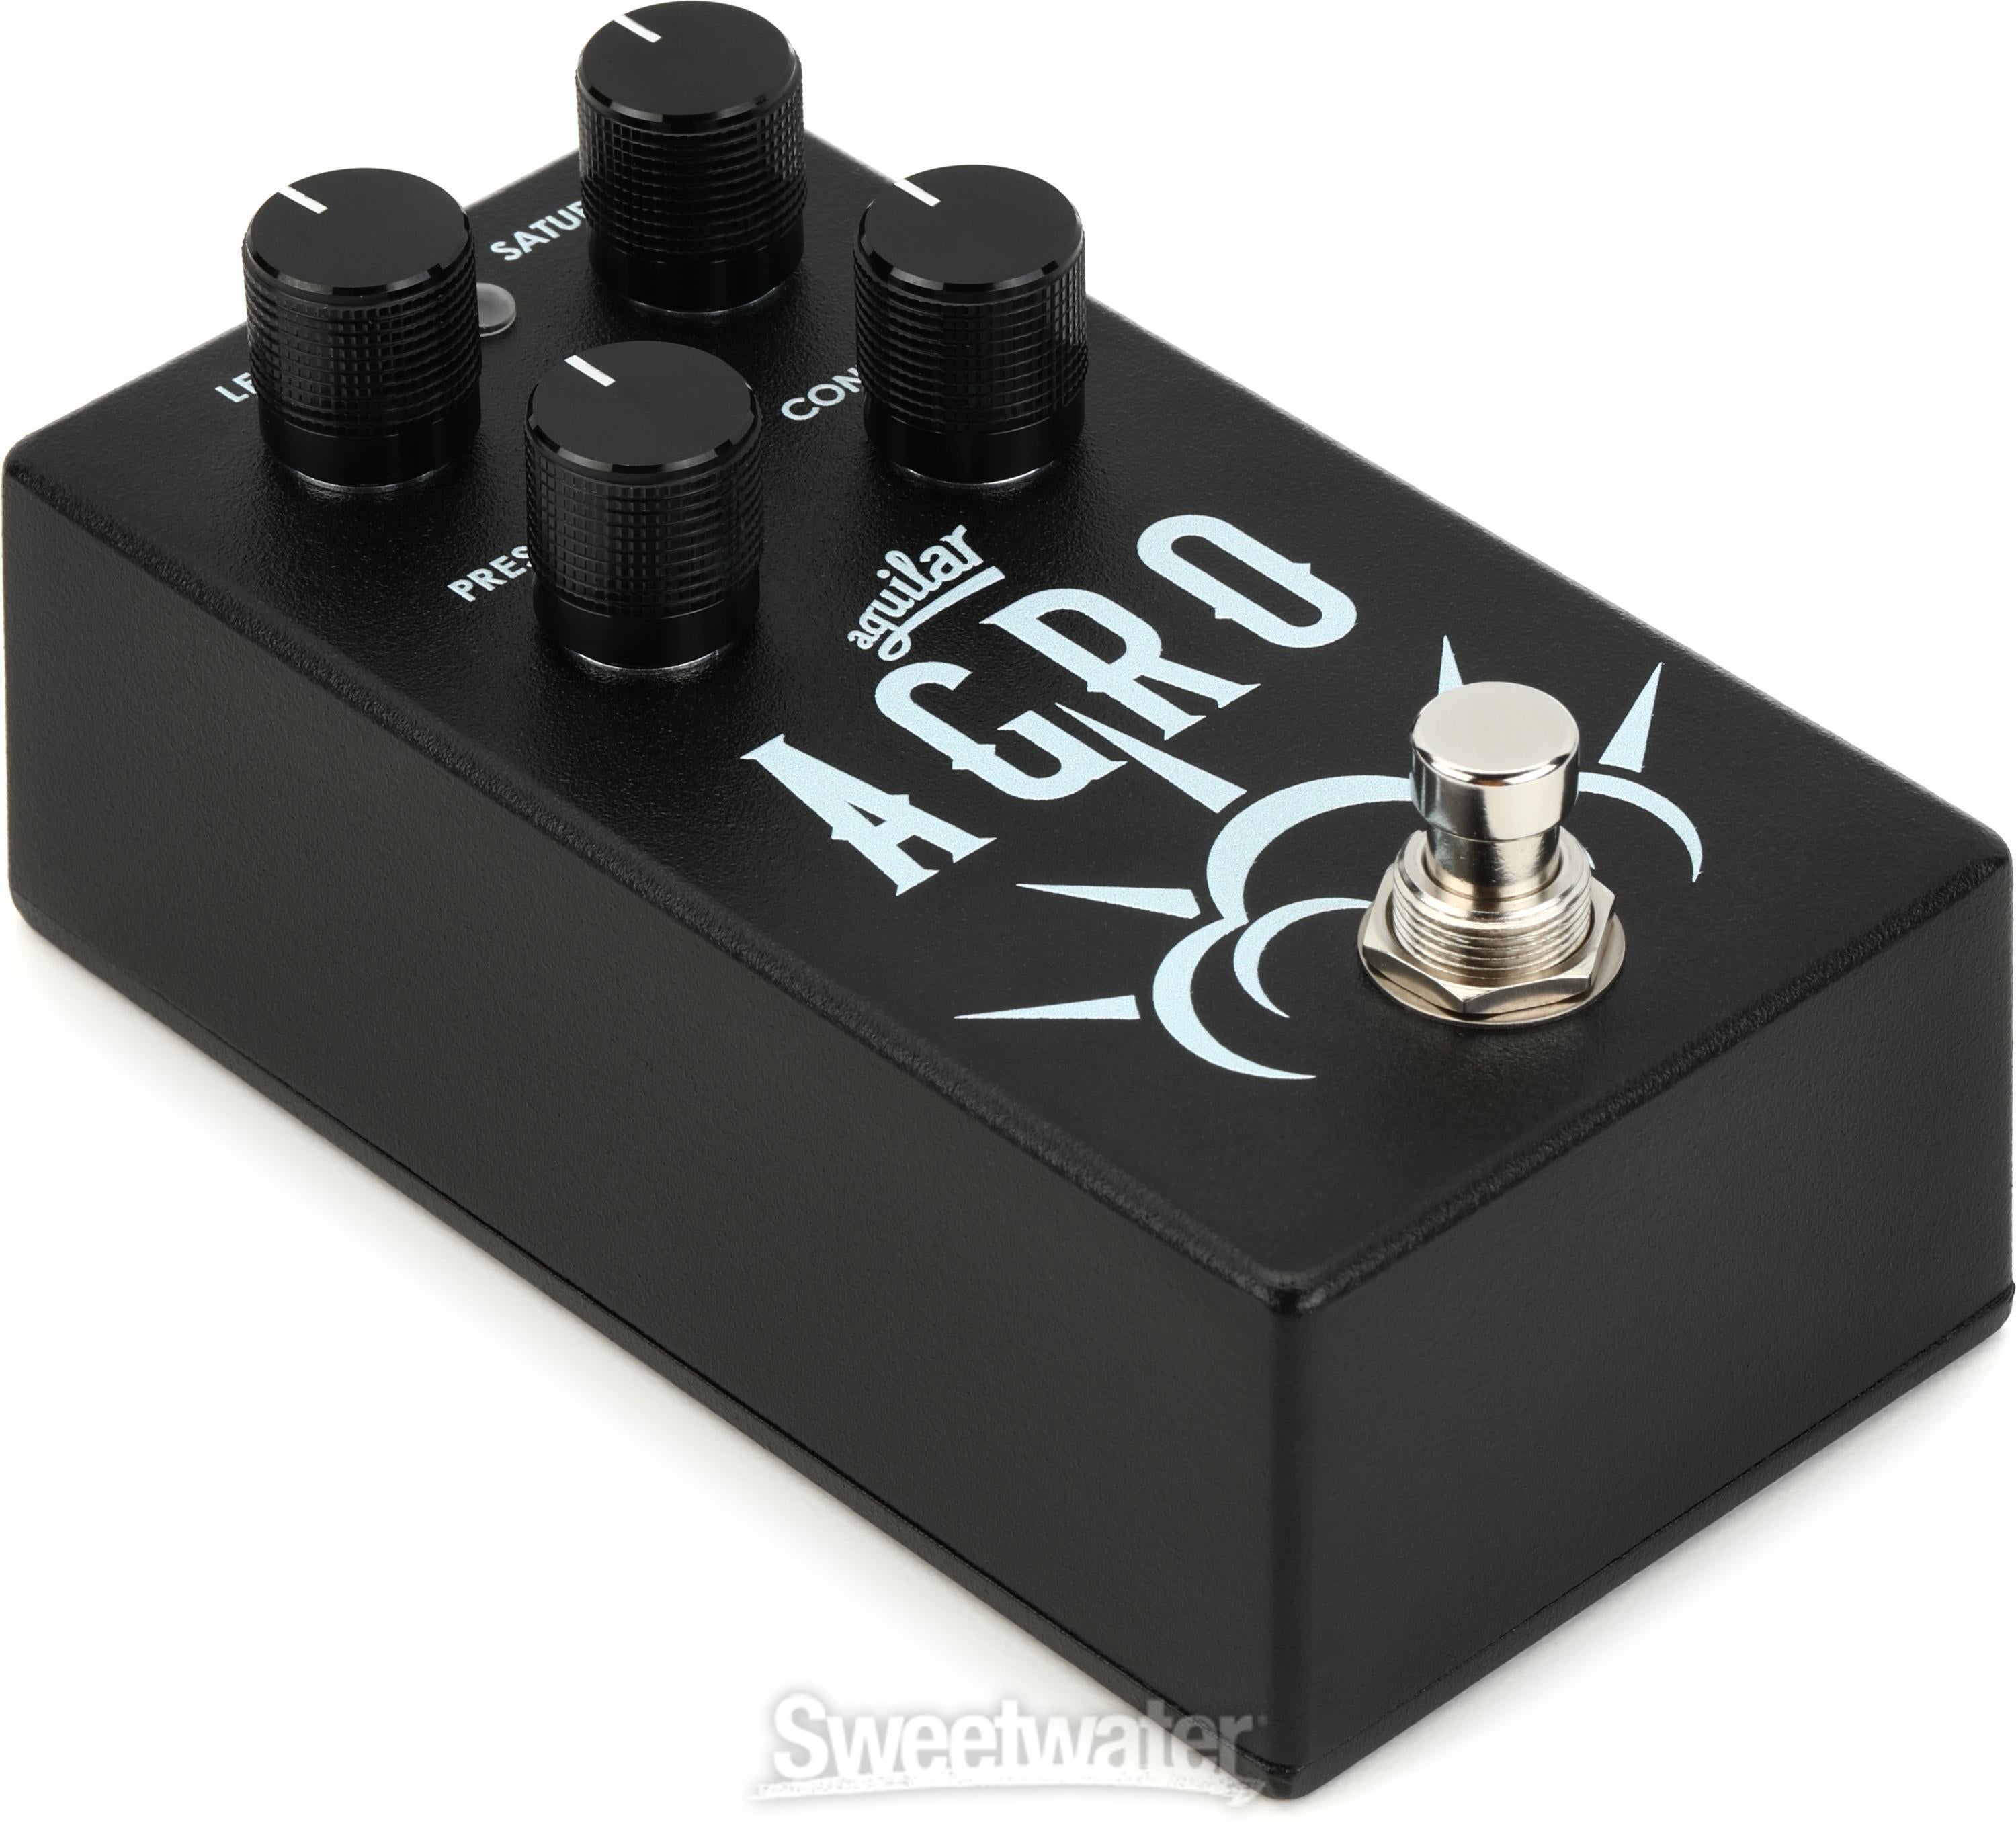 Aguilar AGRO V2 Bass Overdrive Pedal | Sweetwater